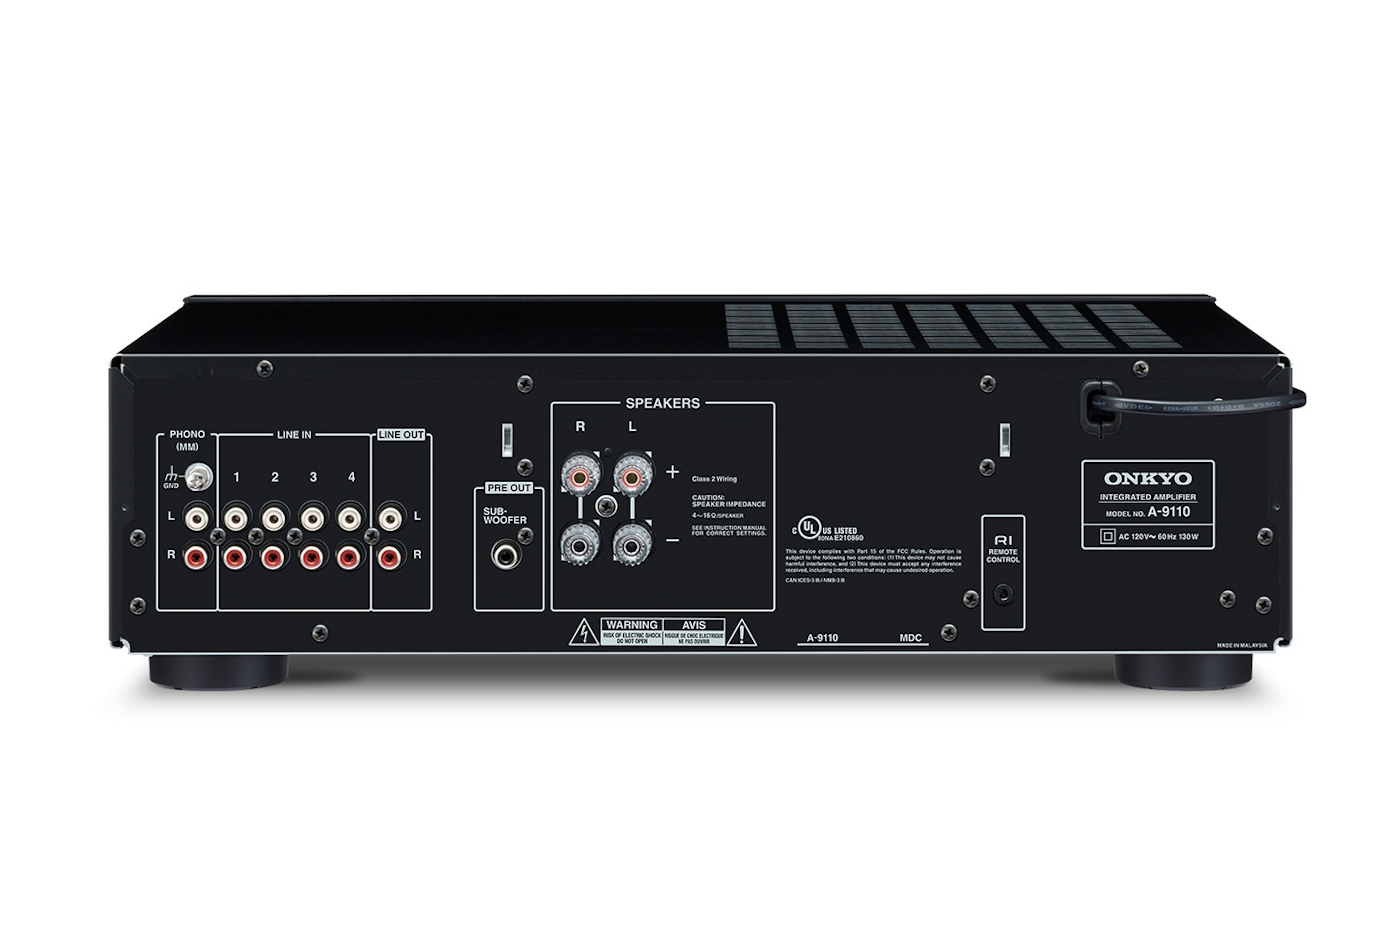 onkyo a9110 stereo receiver back view